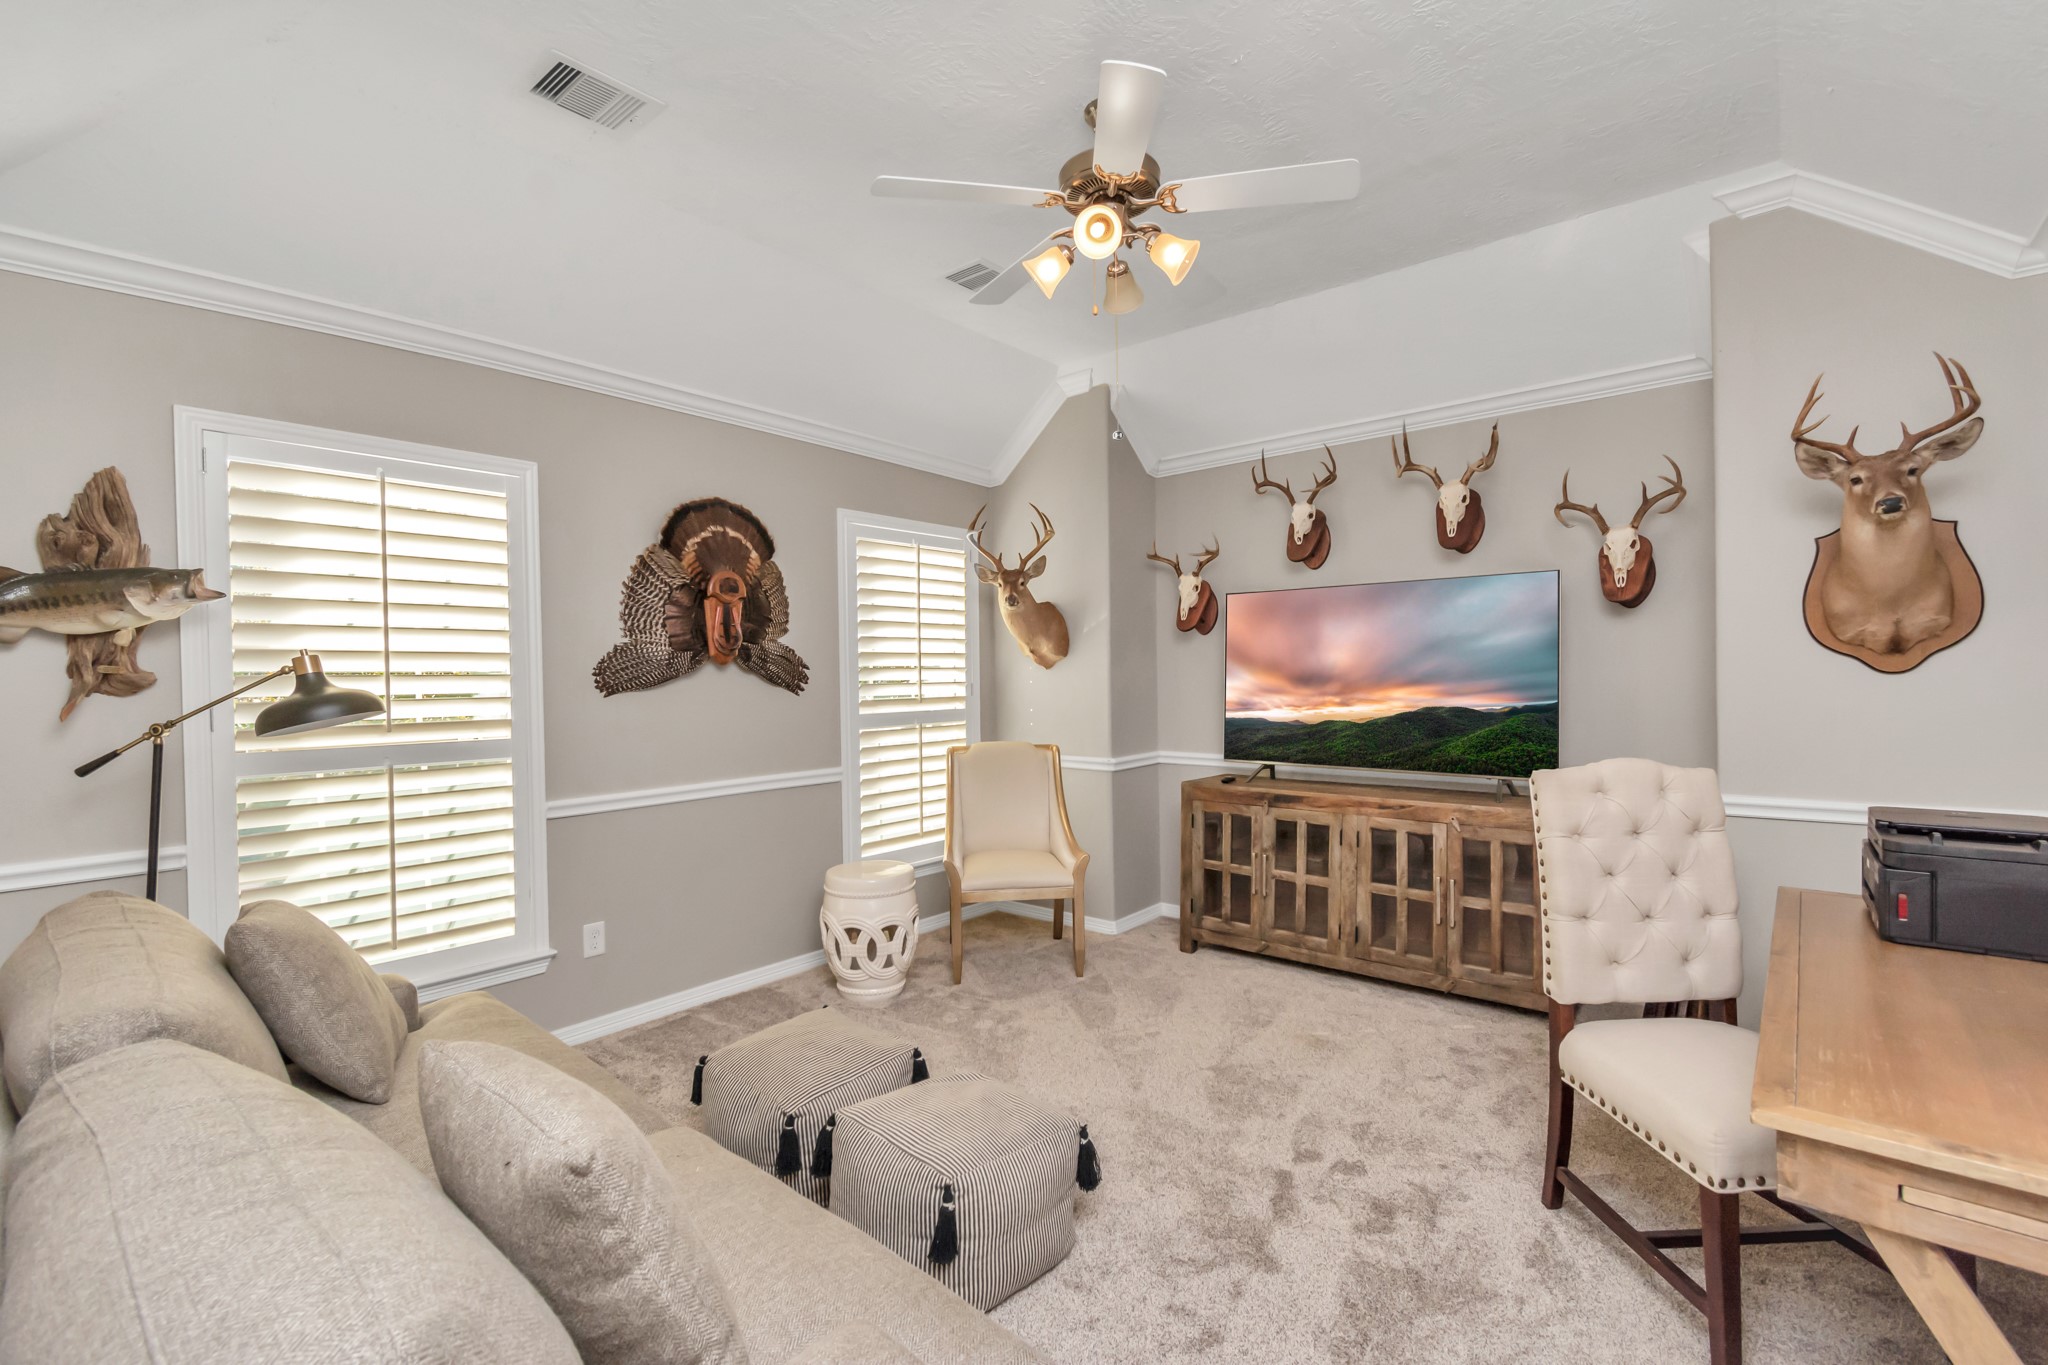 The game room is truly multipurpose, serving as a versatile space that can easily transform into a television room, playroom, or even a home office.